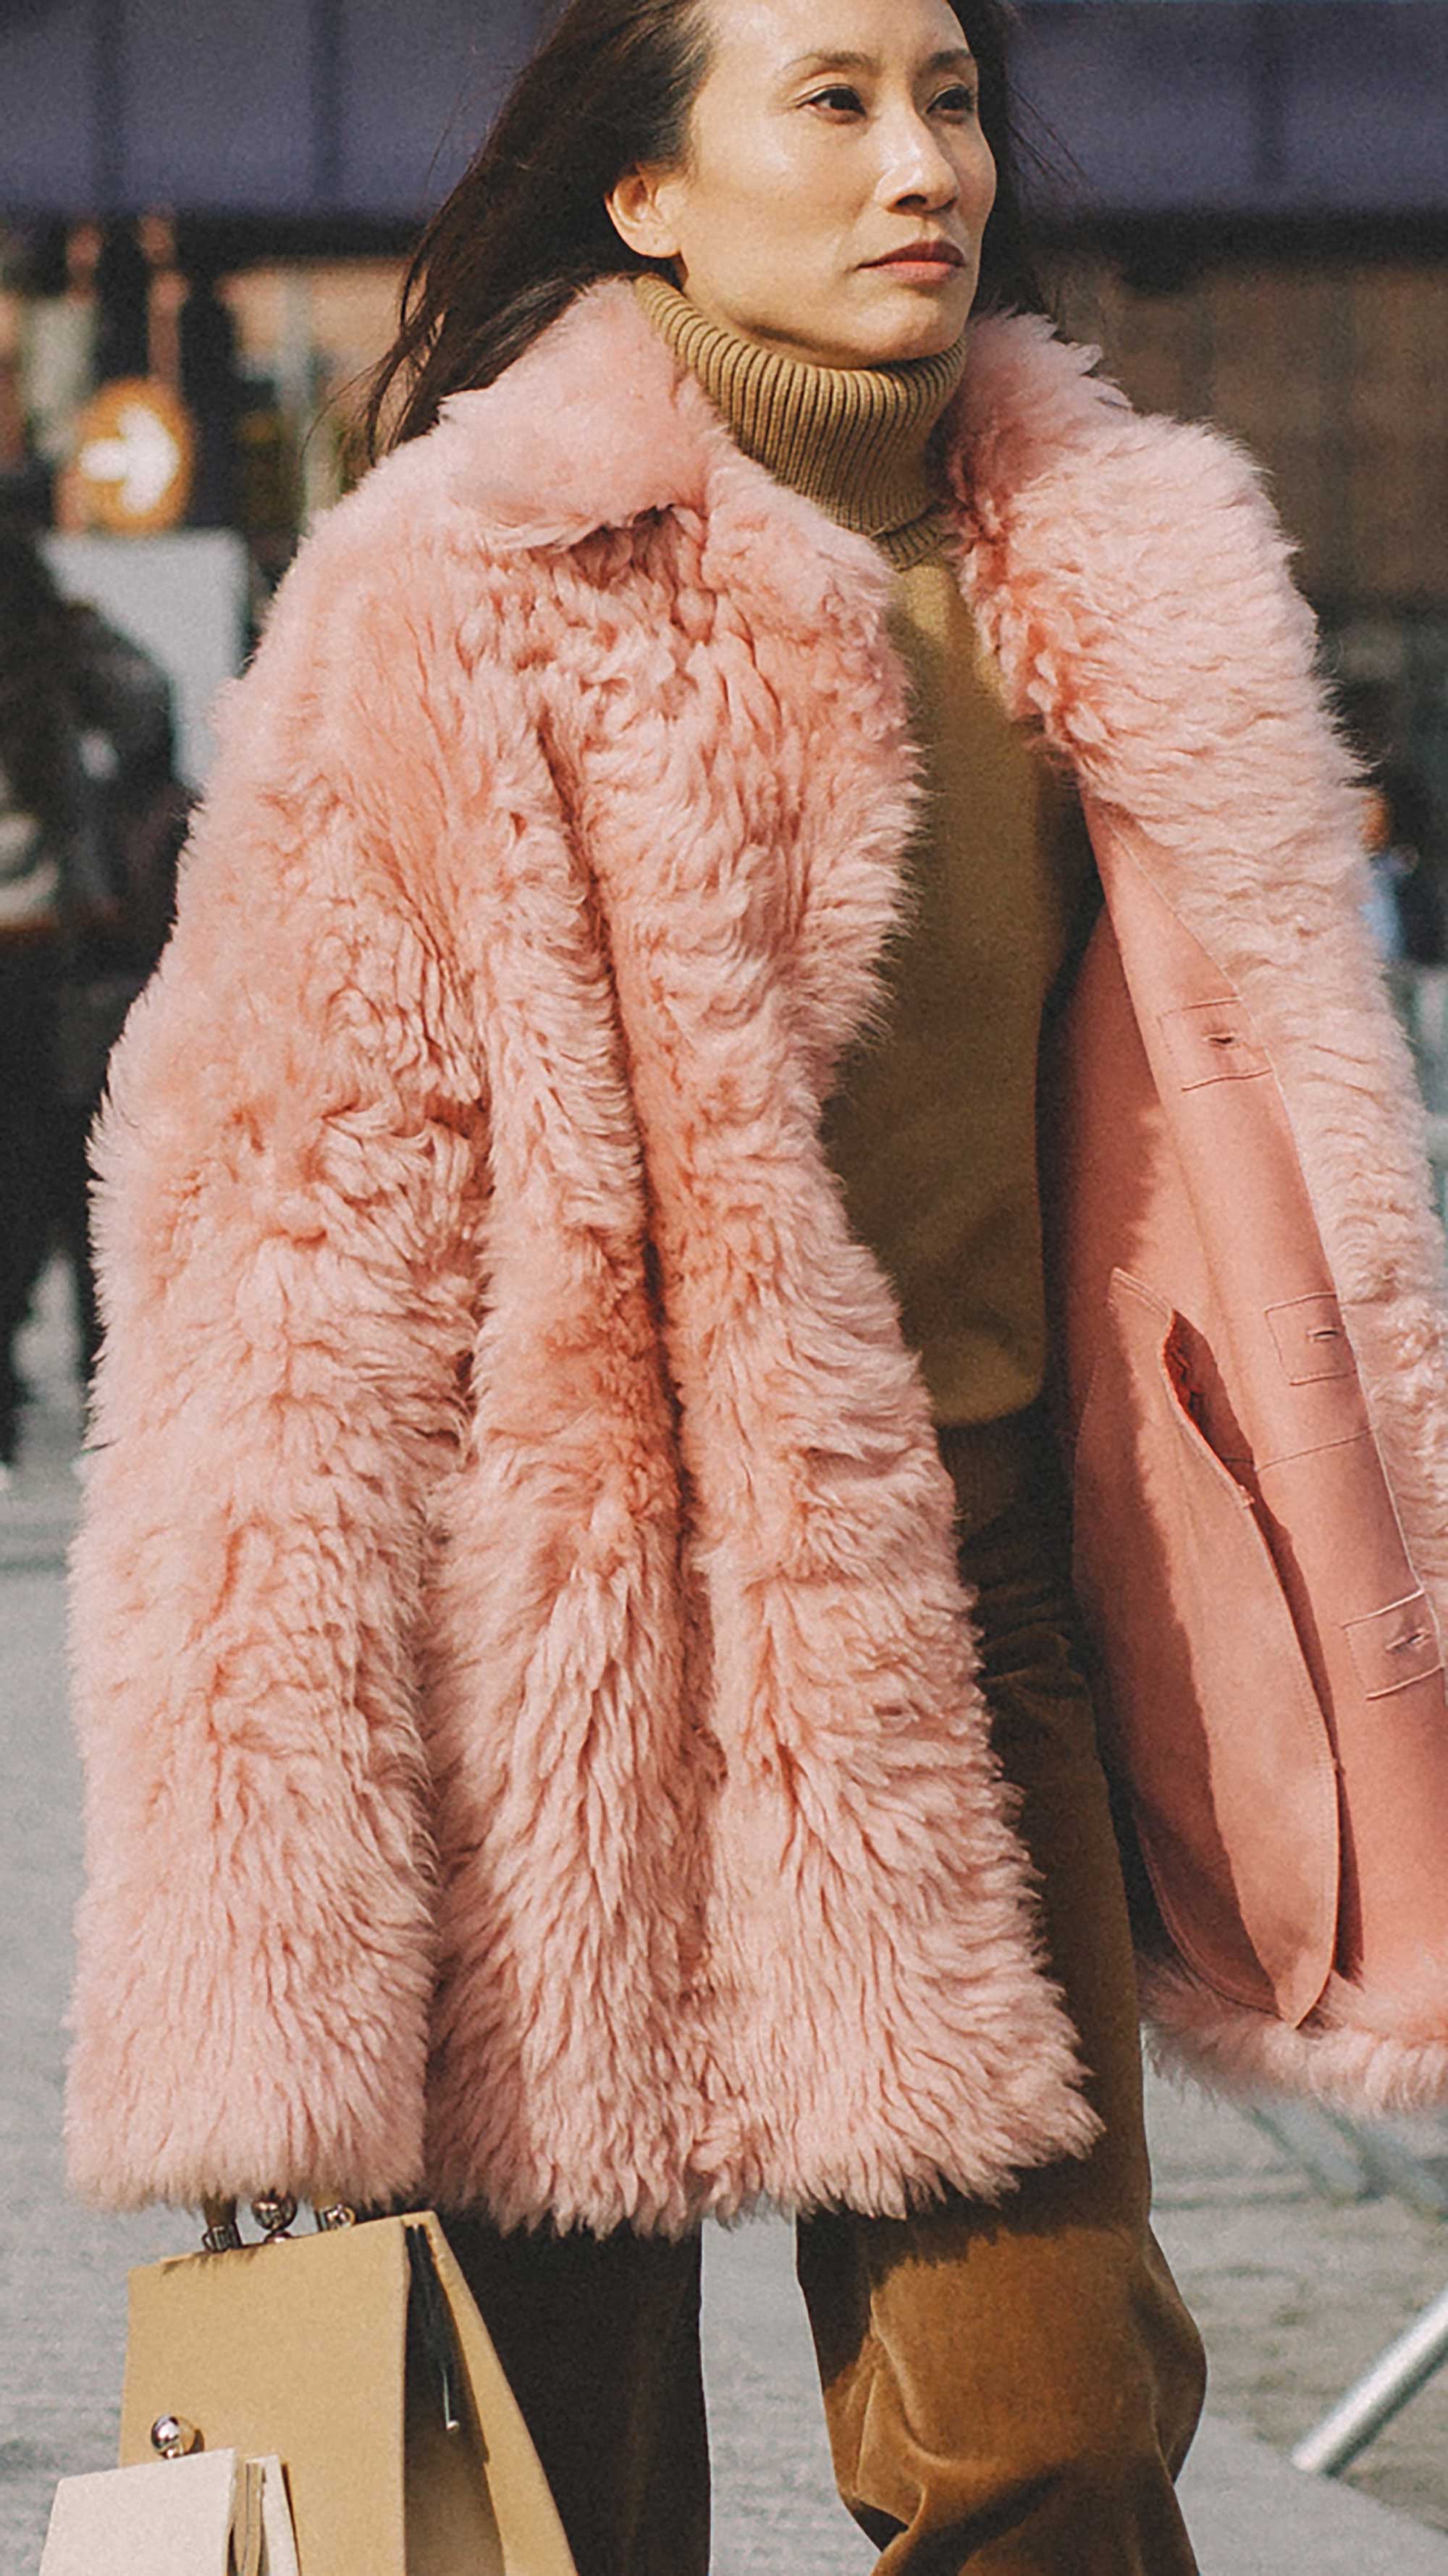 20 irresistible pastel outfit ideas for winter from New York Fashion Week street style9.jpg